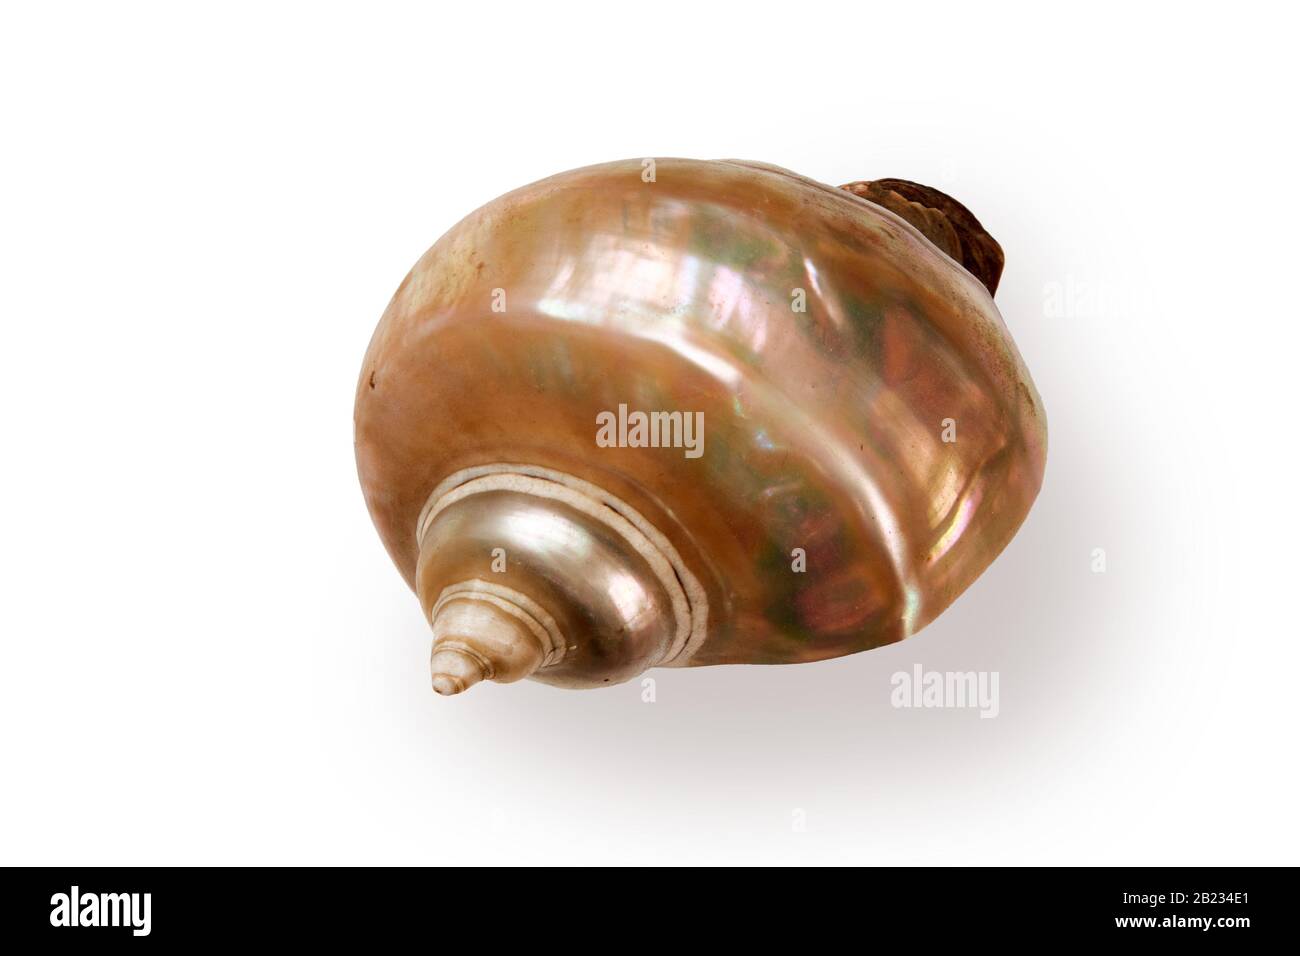 Giant iridescent pearl shell of a sea gastropod isolated on white background Stock Photo